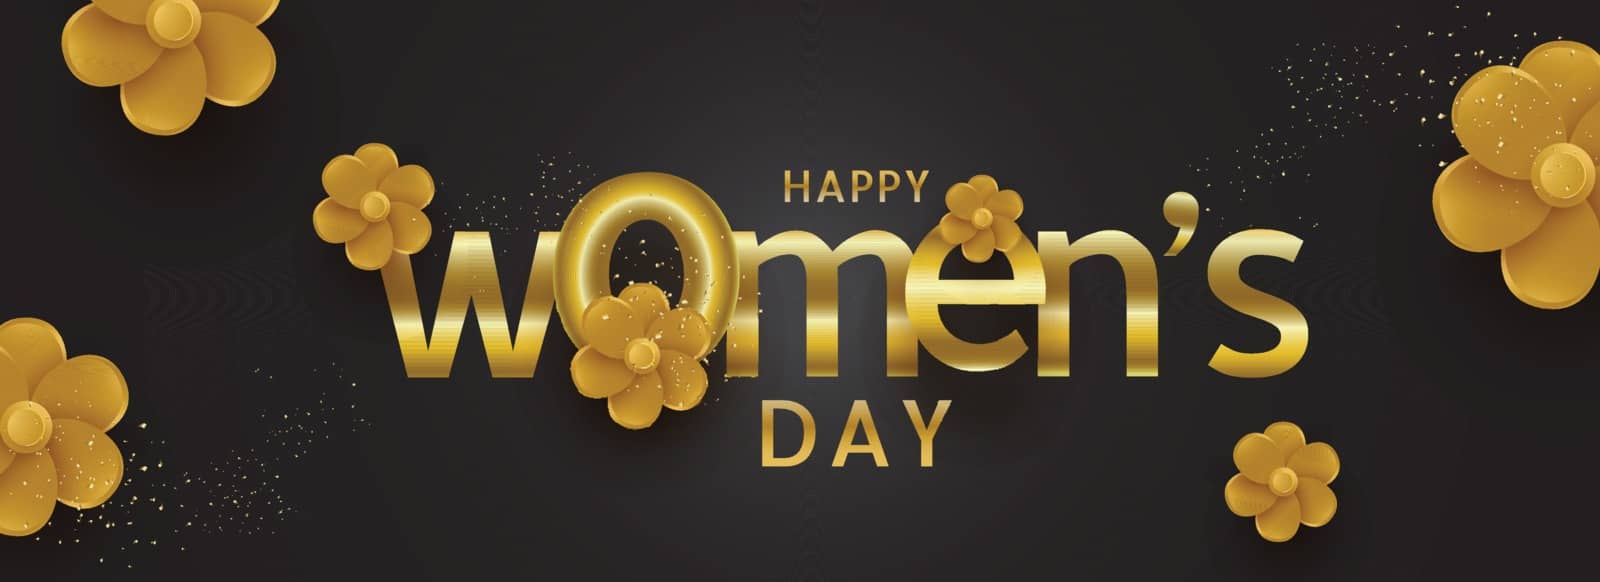 Typography of text happy women's day decorated with brown paper cut flowers on black background.